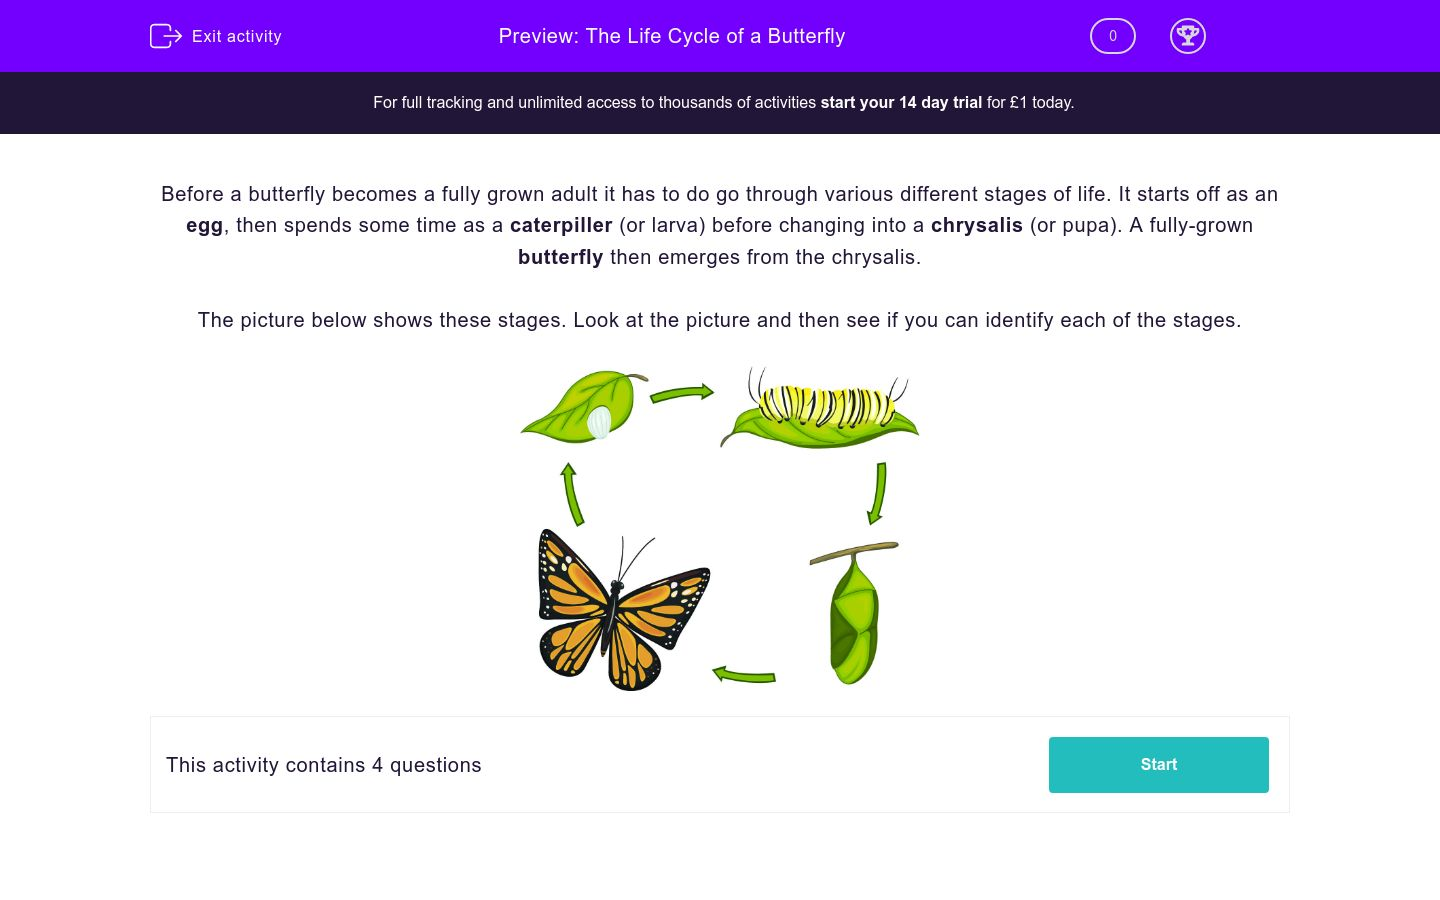 Butterfly Life Cycle Worksheet 2